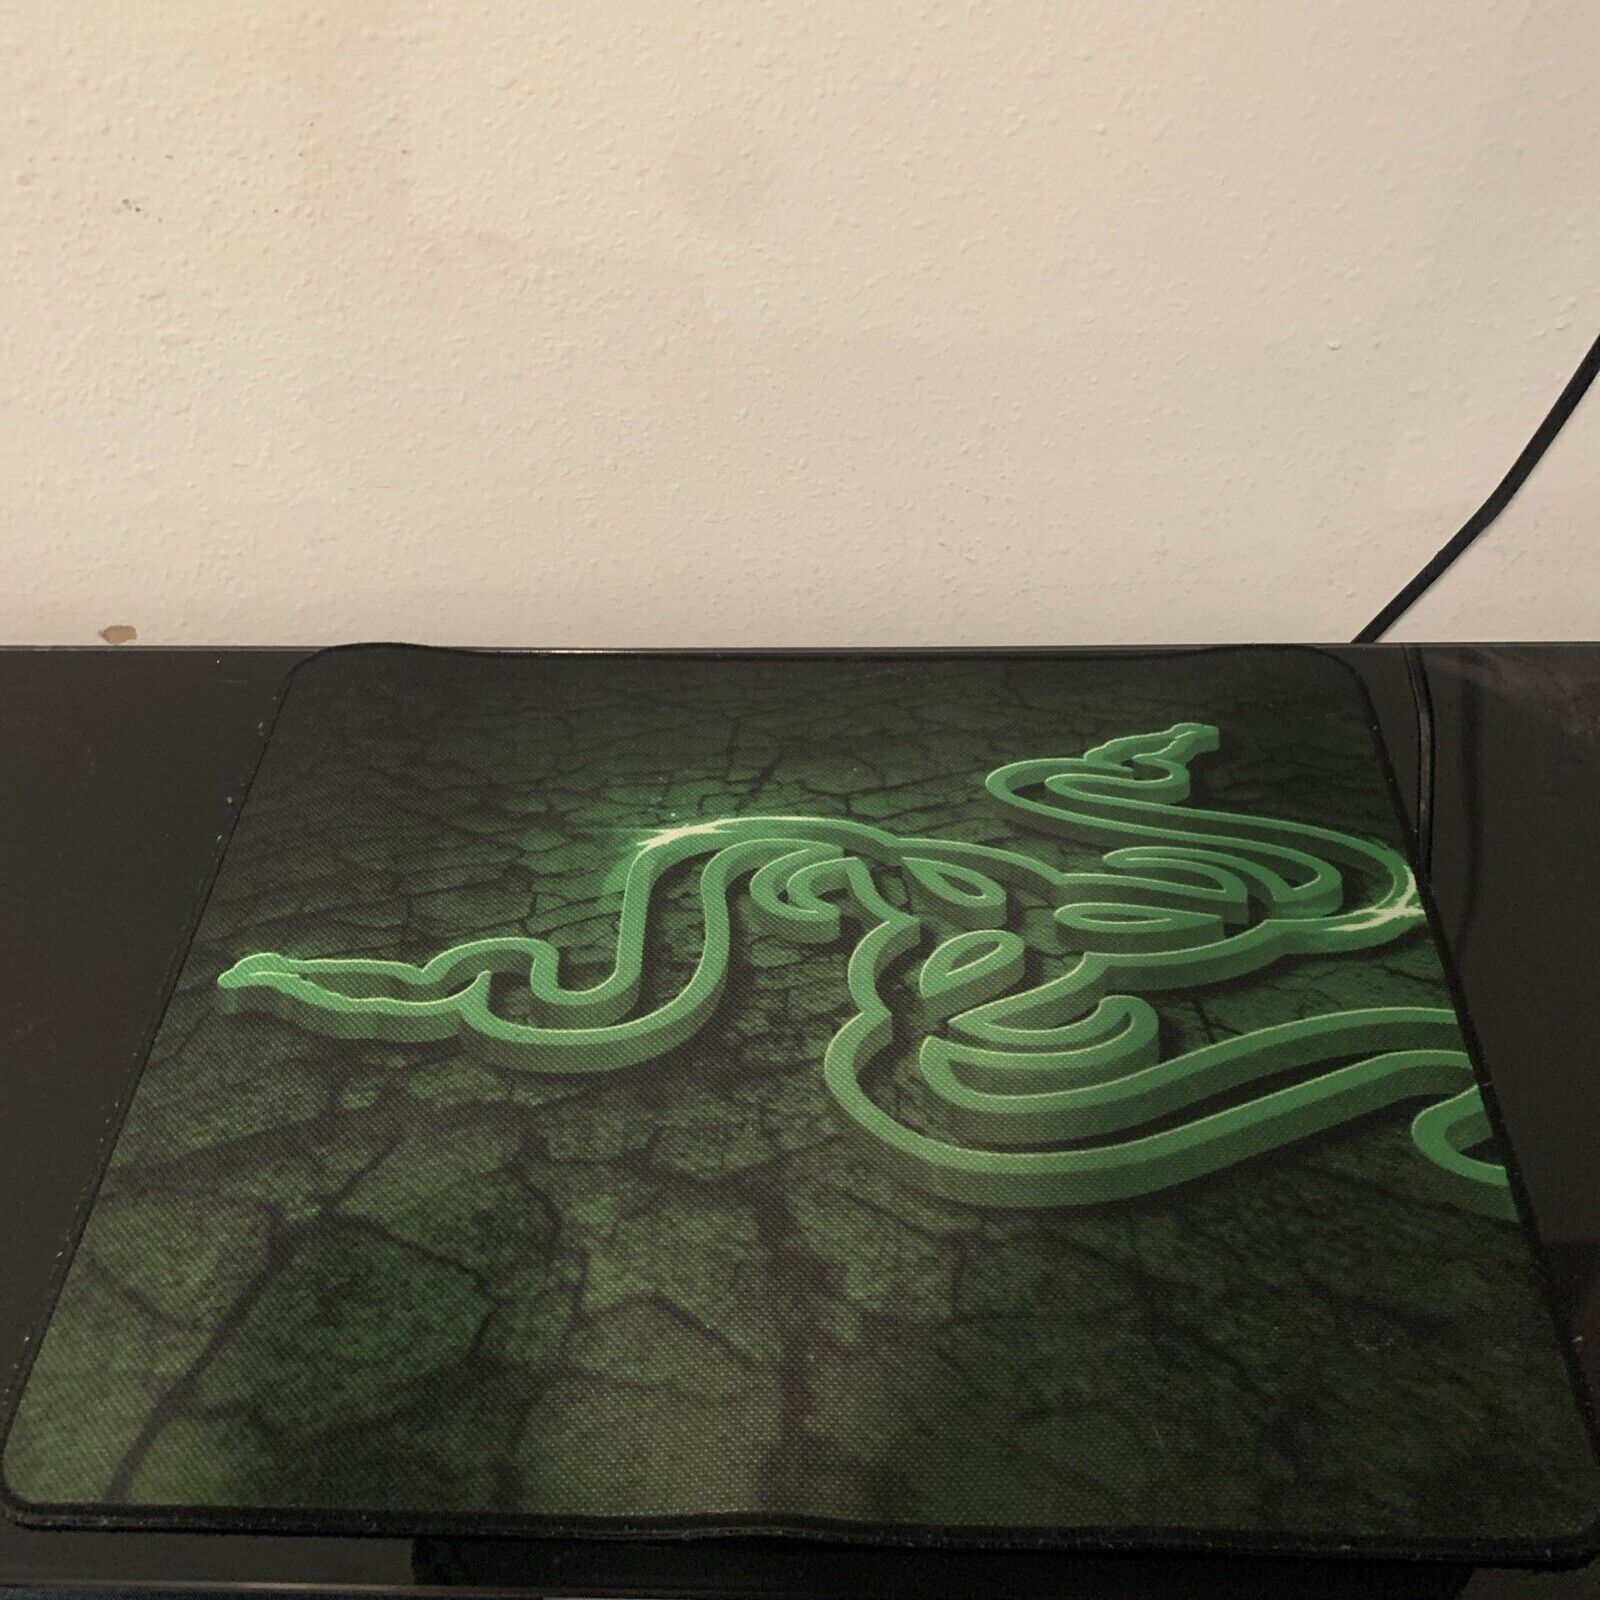 Large Razer Goliathus Gaming Mouse SPEED Edition Mat Pad Size 700*300